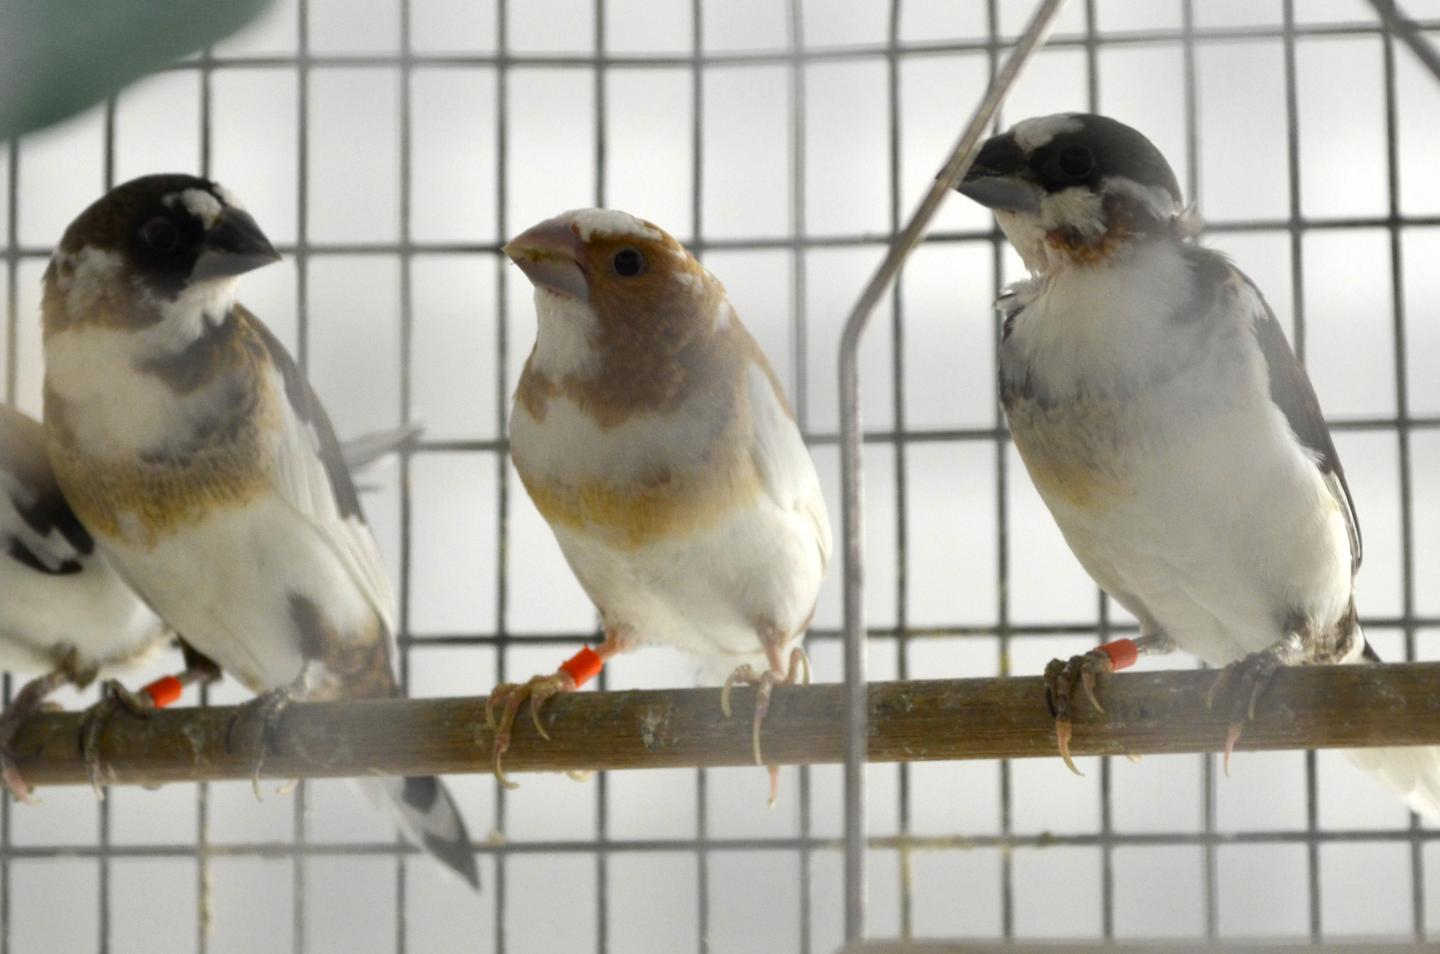 Image of Bengalese Finches